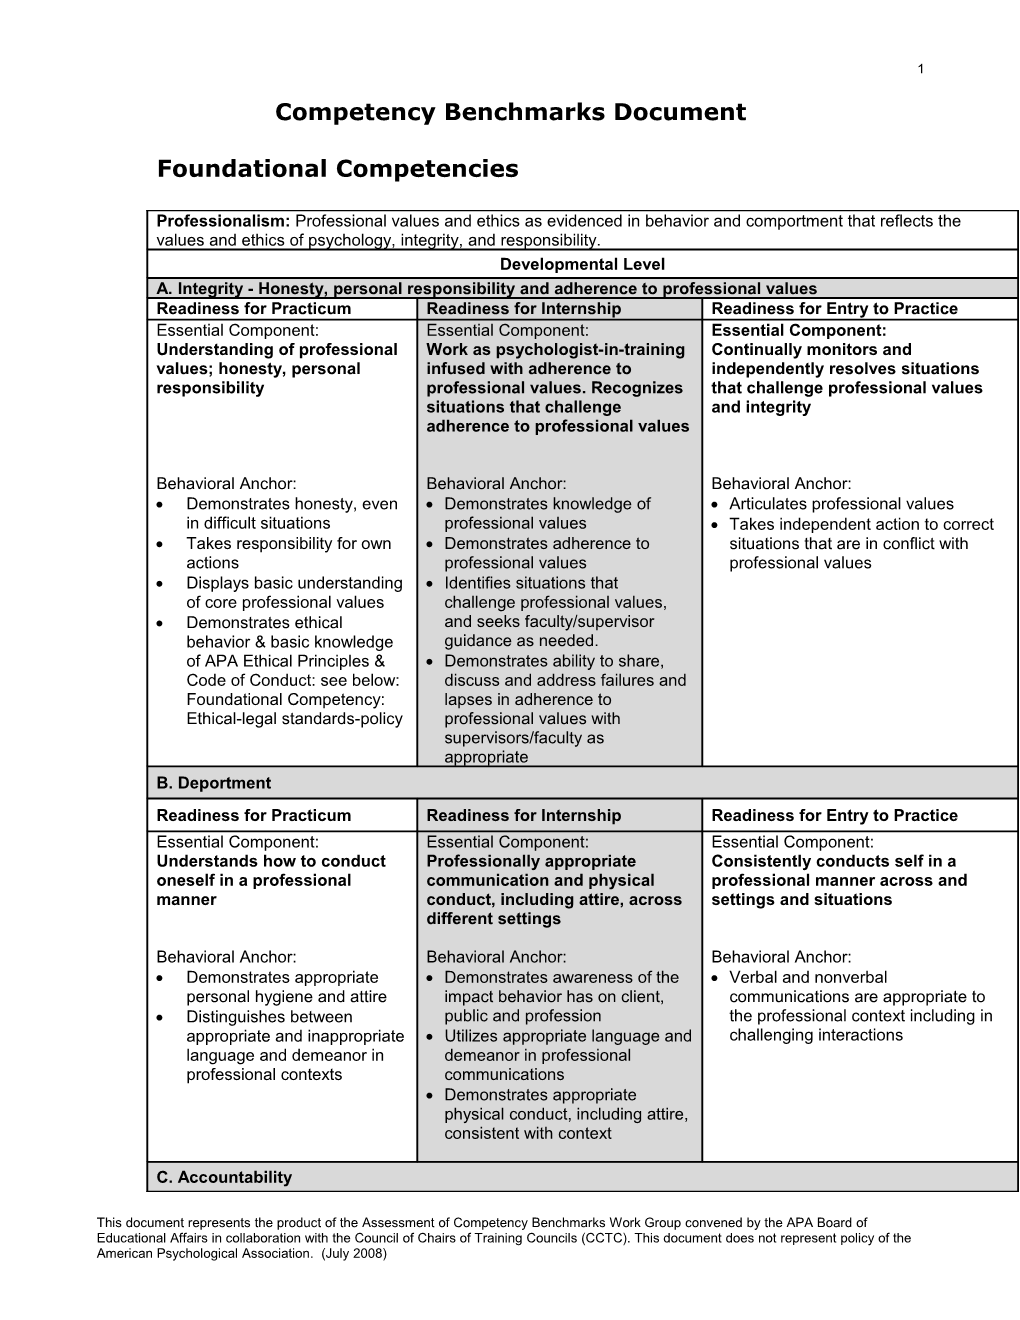 Competency Benchmarks Document